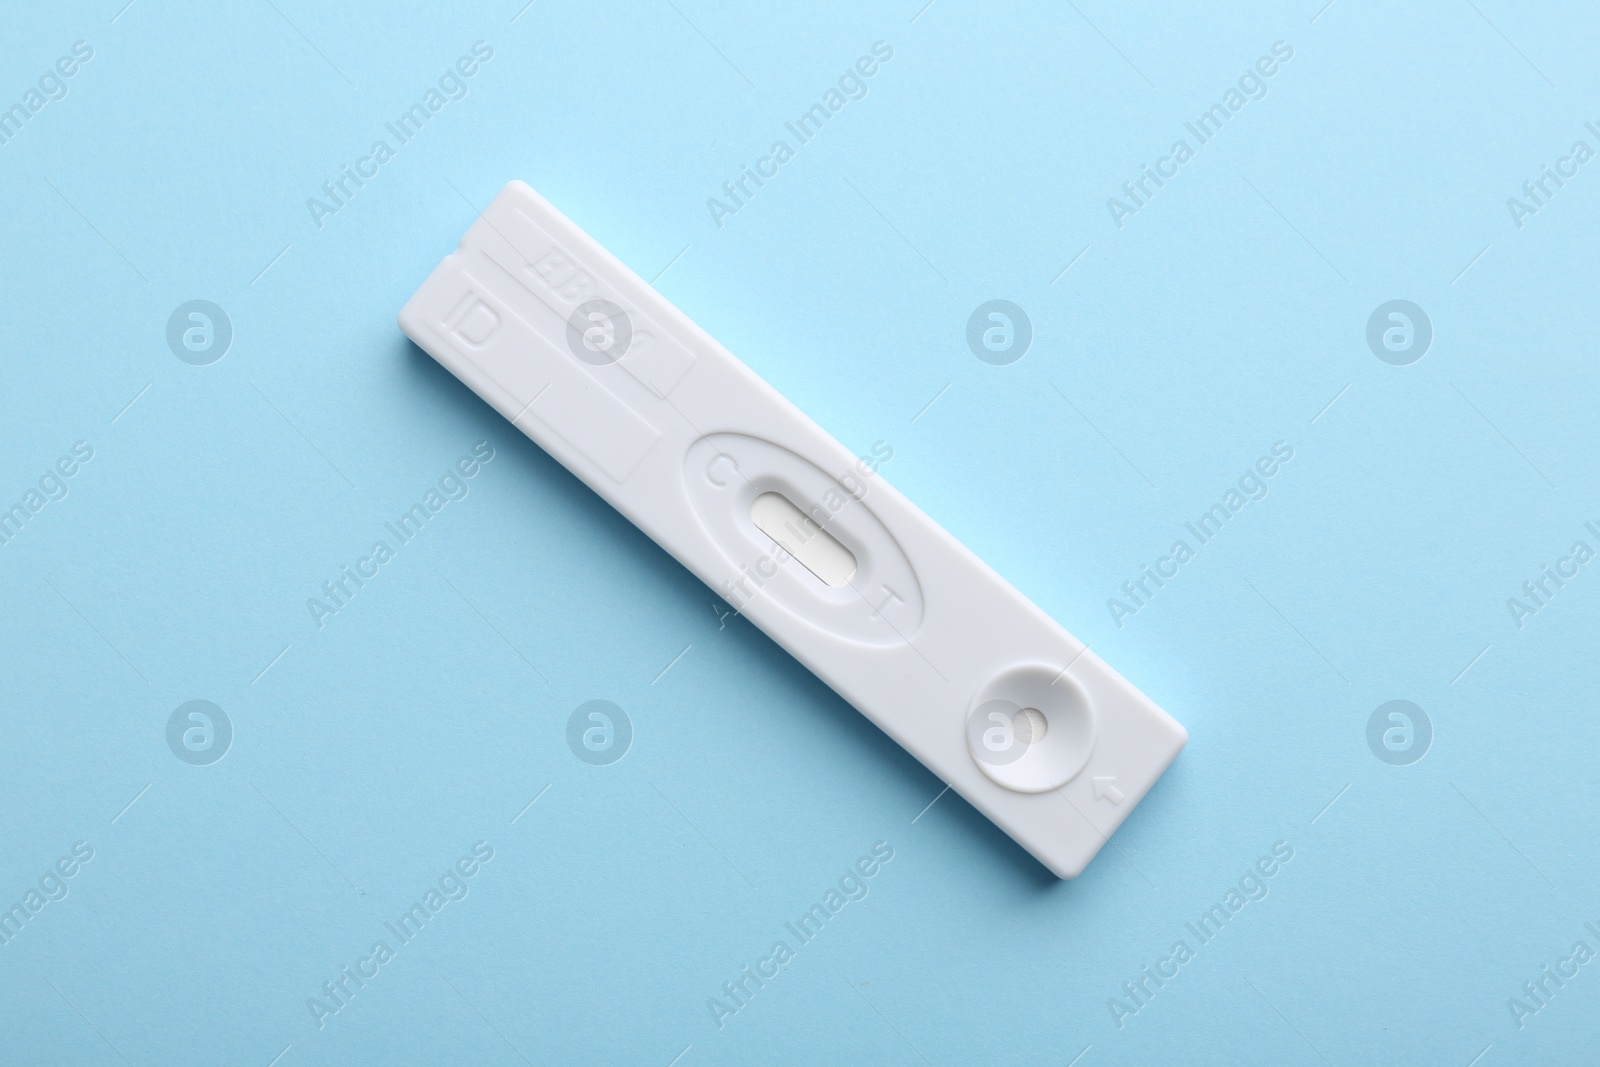 Photo of Disposable express test on light blue background, top view